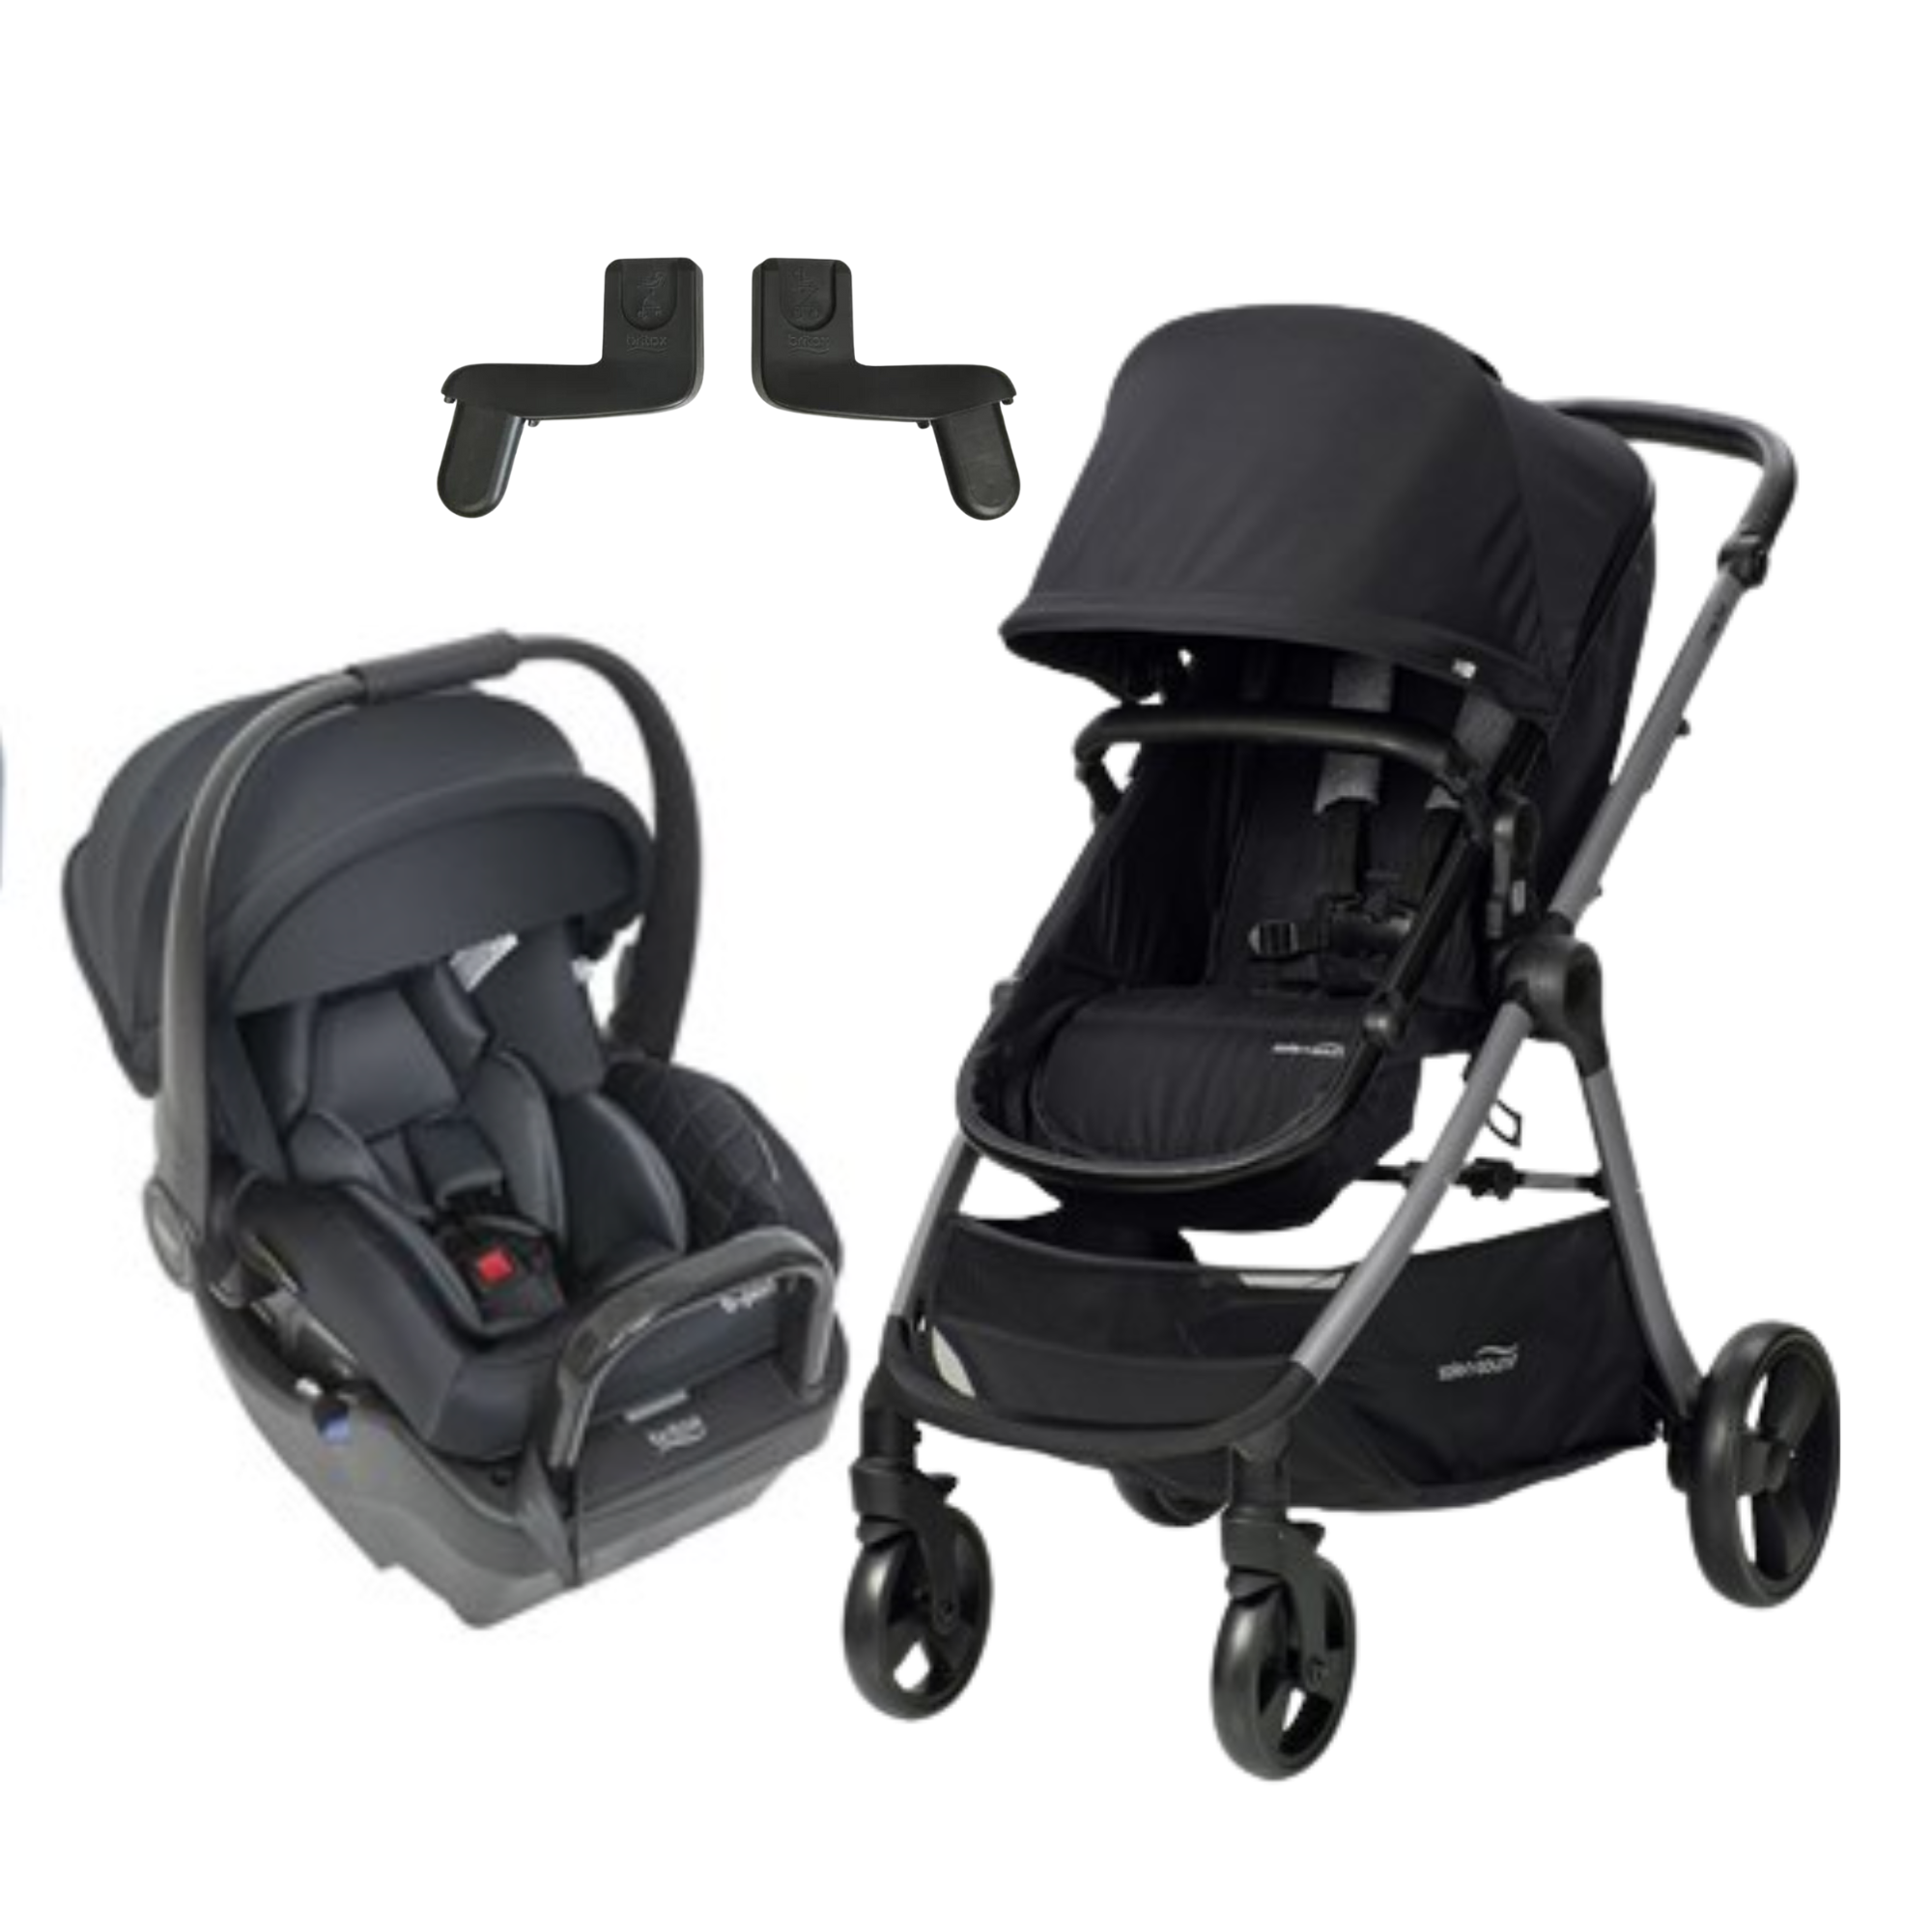 Safe-n-Sound Cosy Lux Travel System